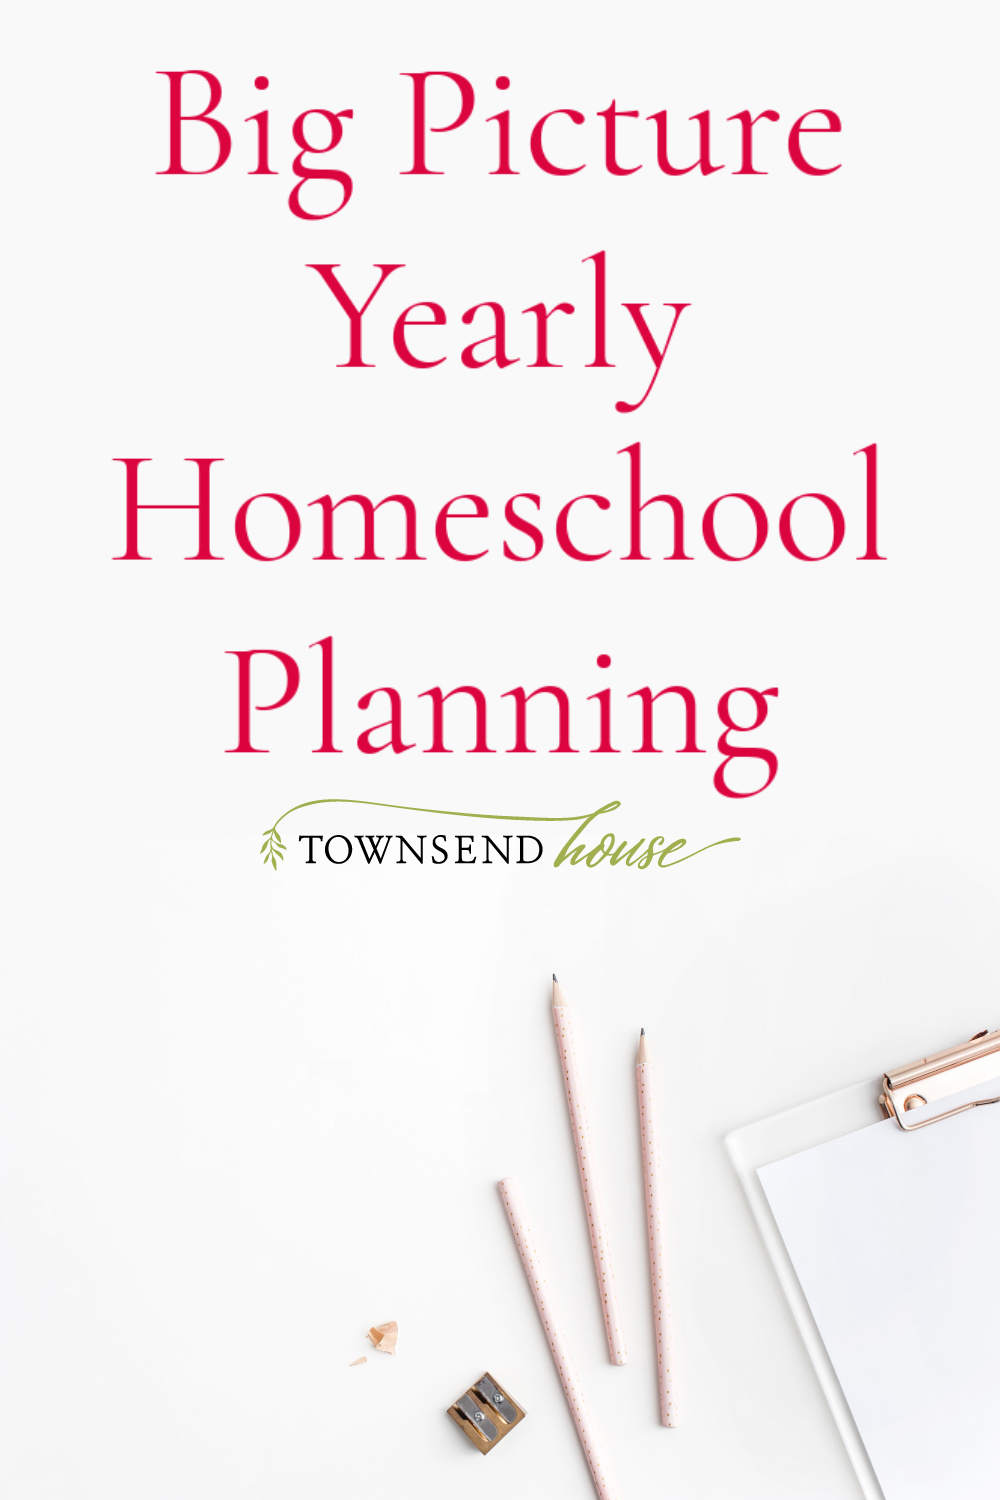 Big Picture Yearly Homeschool Planning – 2020-2021